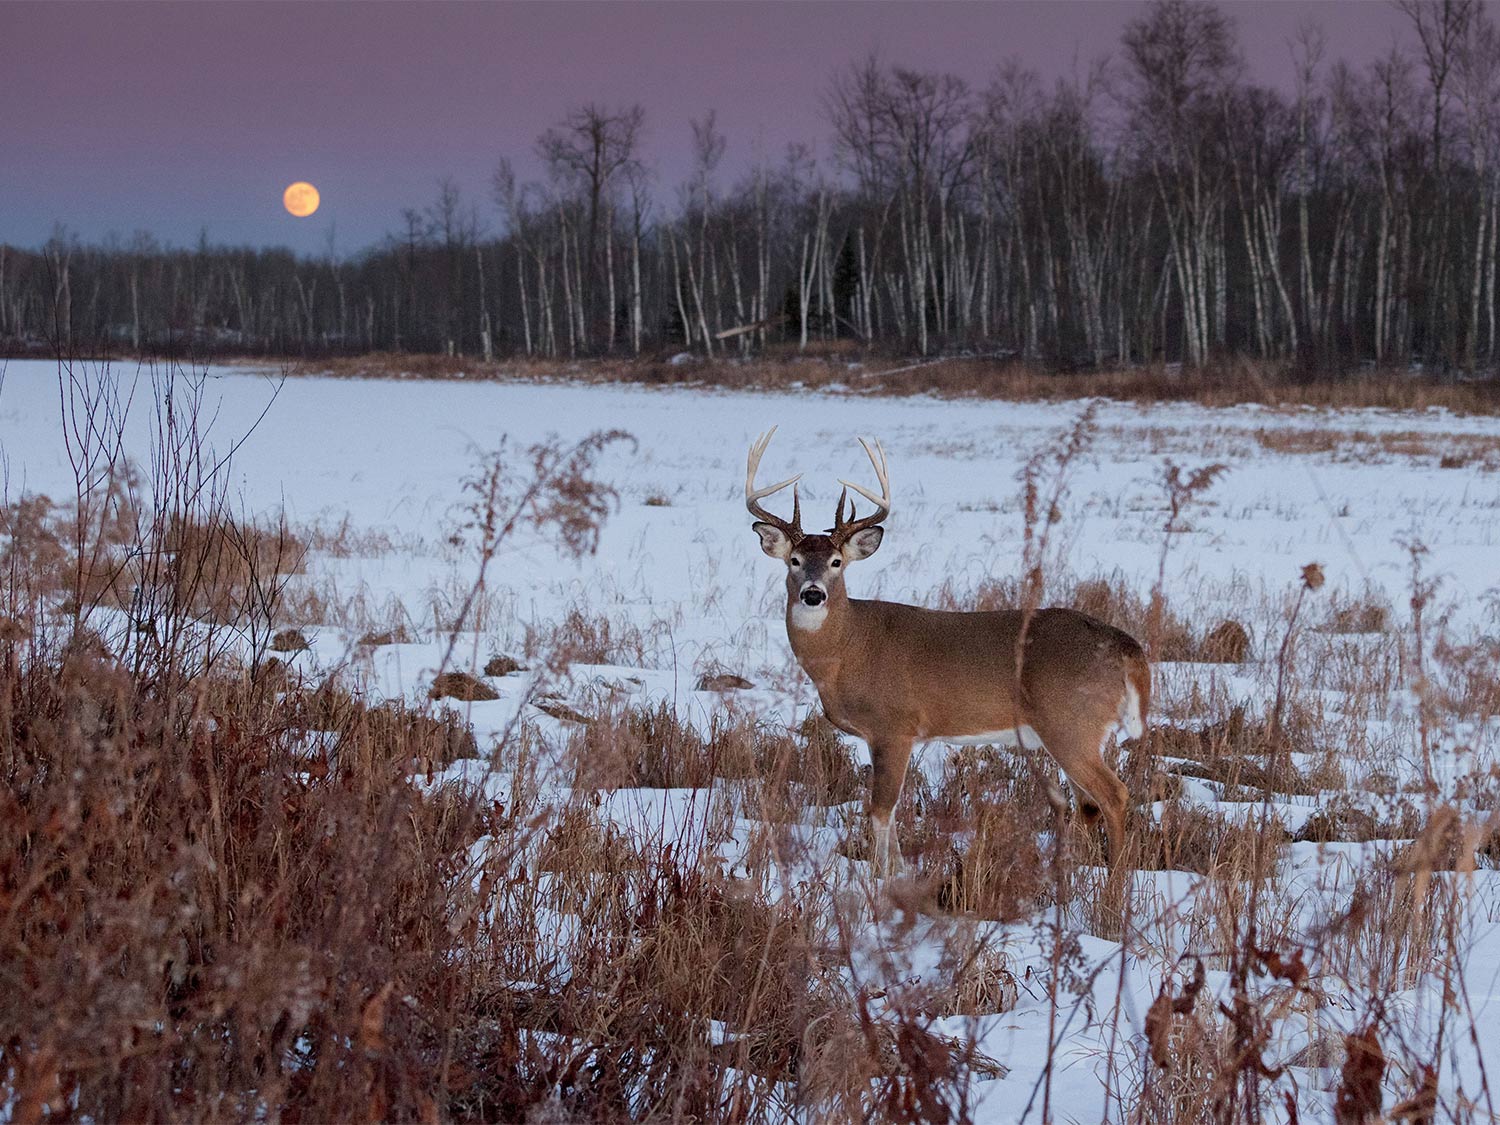 whitetail buck in the snow with the moon in the background.